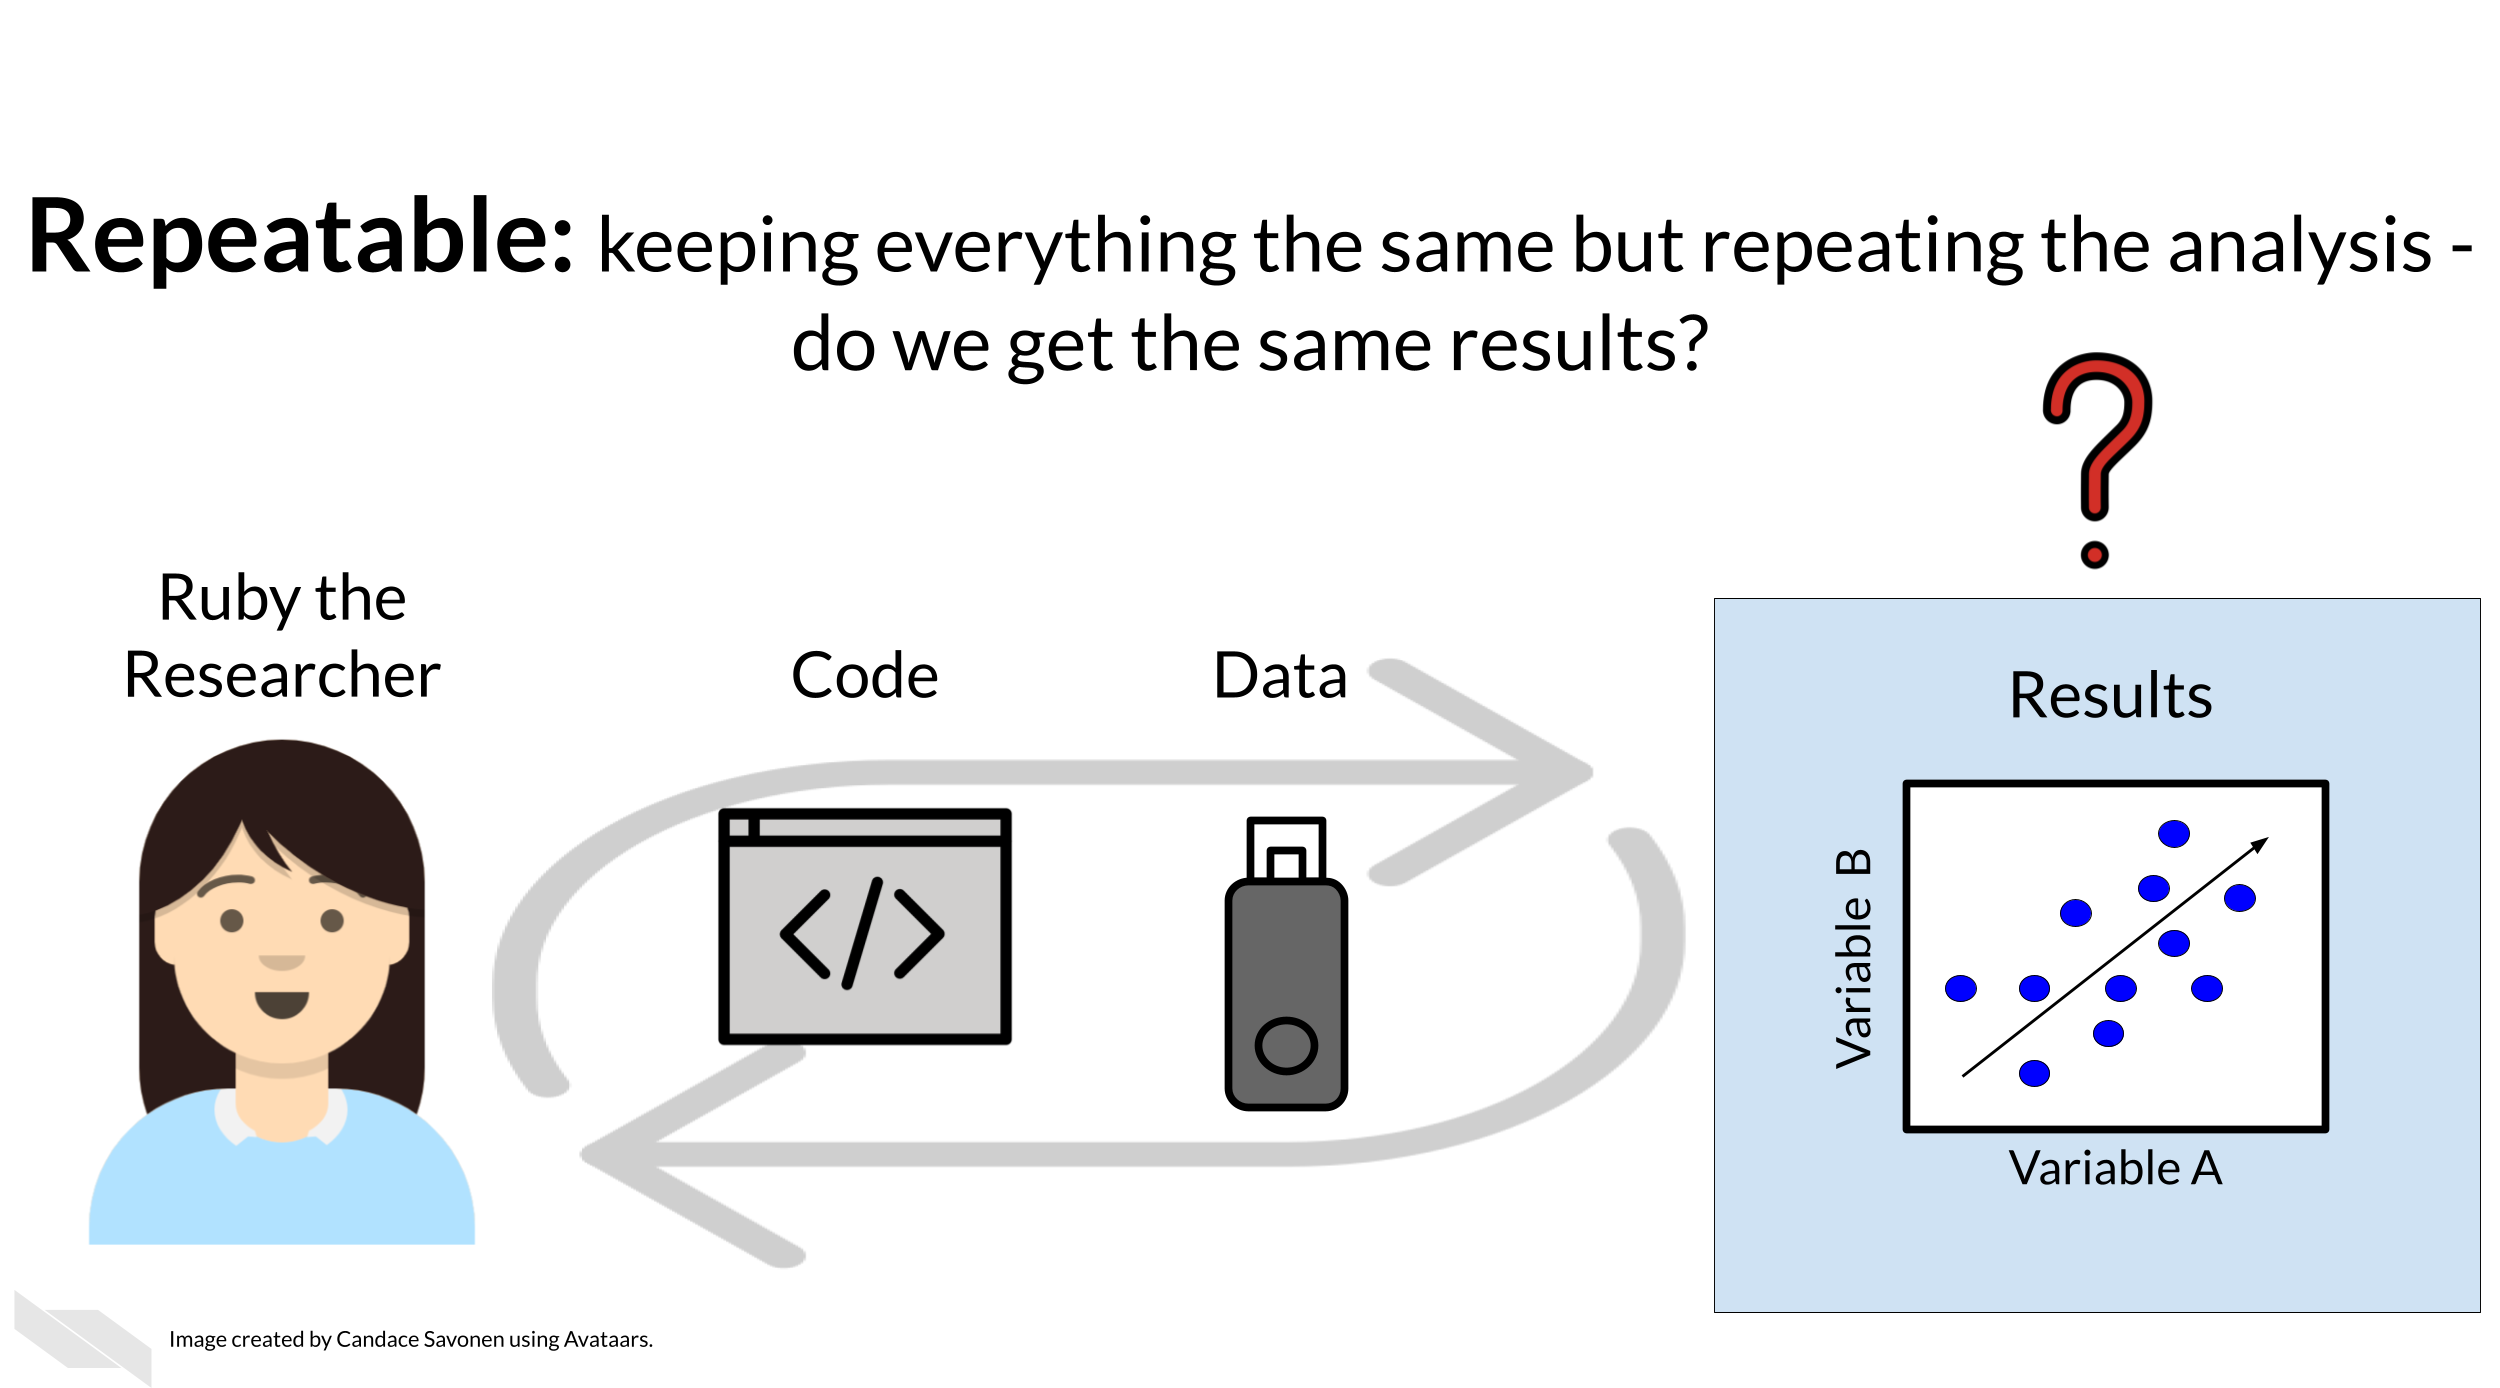 Repeatable means that if you keep everything the same but repeat the analysis - do you get the same results? Ruby the researcher has her same code and data but a repeat sign around them. If she re-runs the analysis, will she get the same scatterplot of results we’ve seen previously?